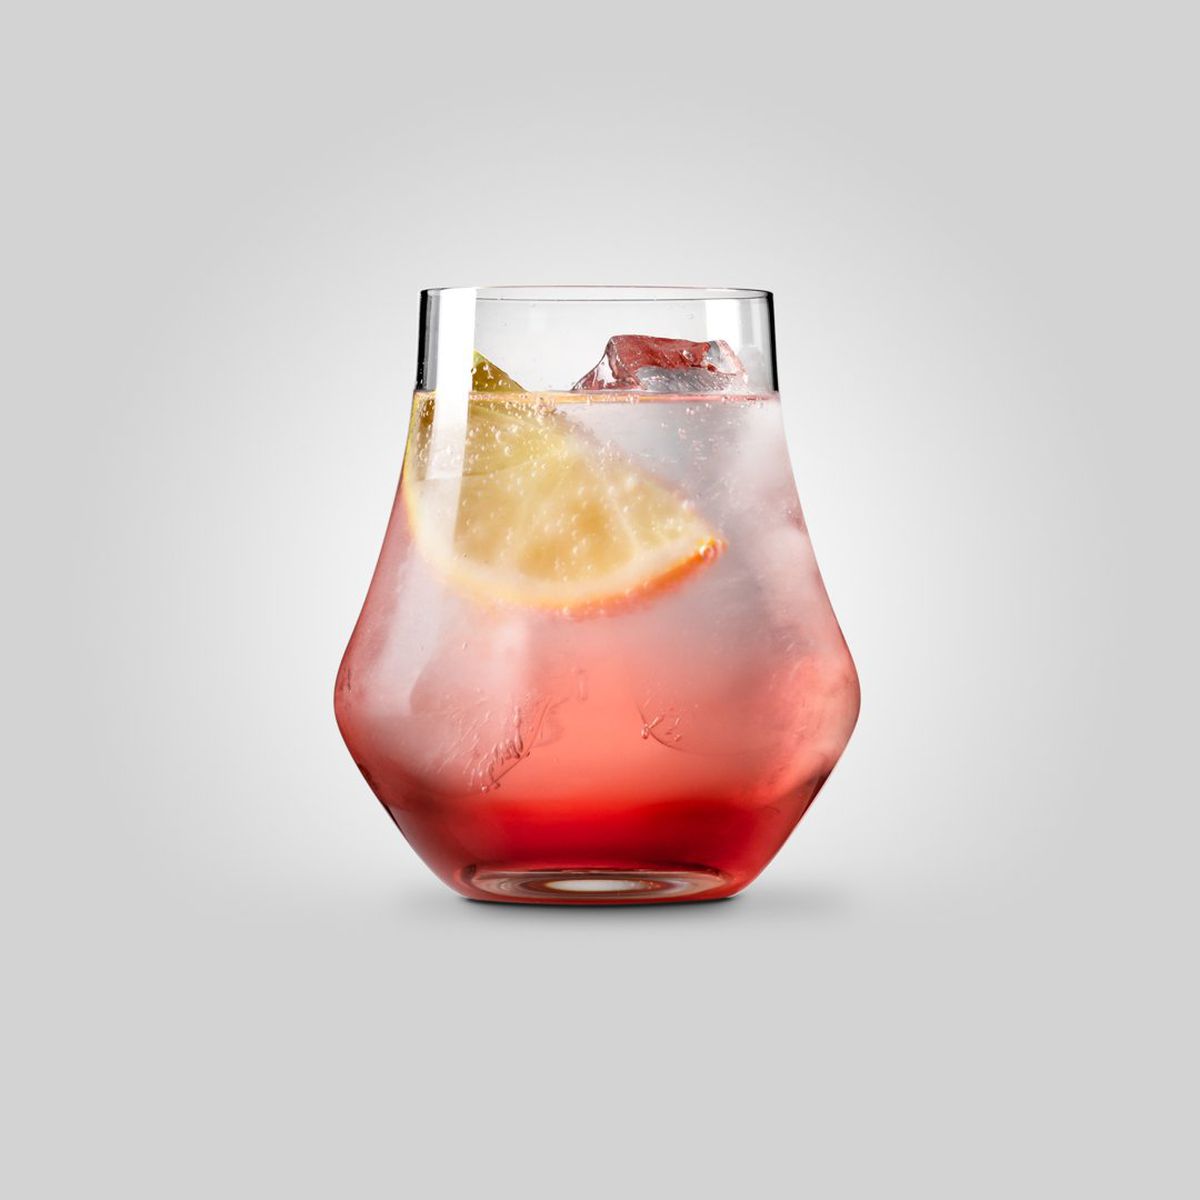 A red-colored drink in a glass with ice and lemon